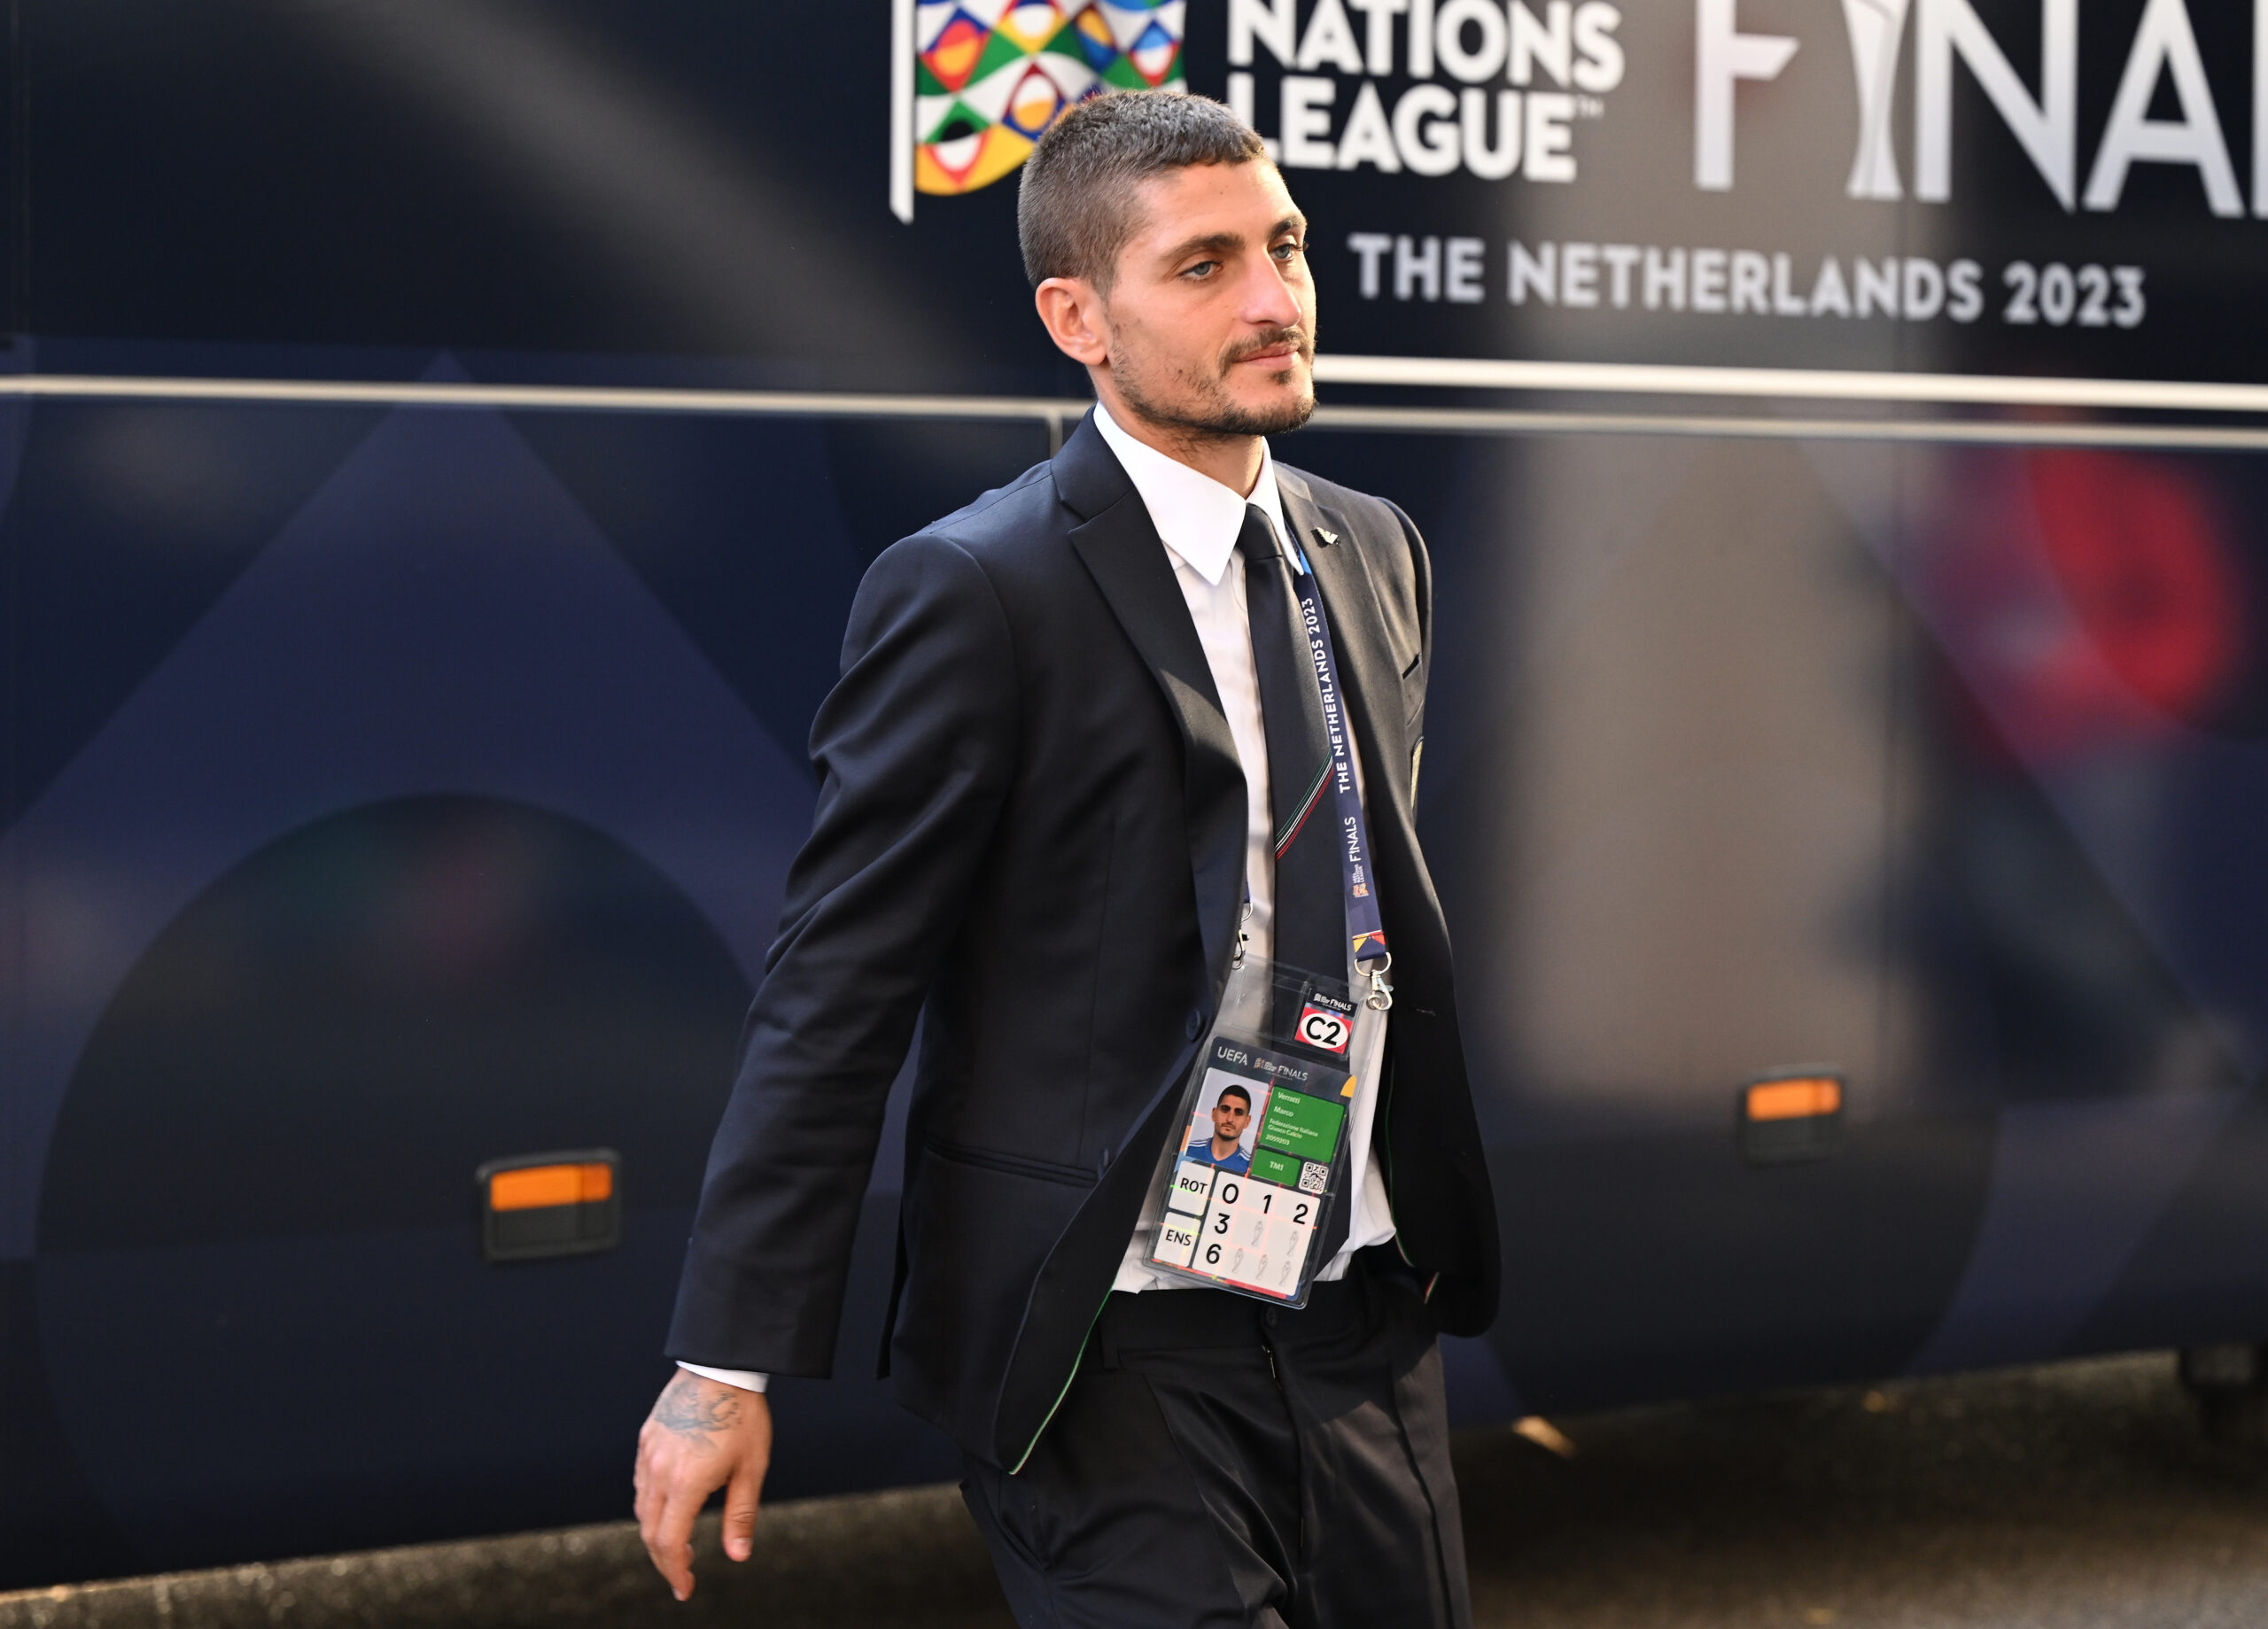 ENSCHEDE, NETHERLANDS - JUNE 15: Marco Verratti of Italy arrives before the UEFA Nations League 2022/23 semifinal match between Spain and Italy at FC Twente Stadium on June 15, 2023 in Enschede, Netherlands.